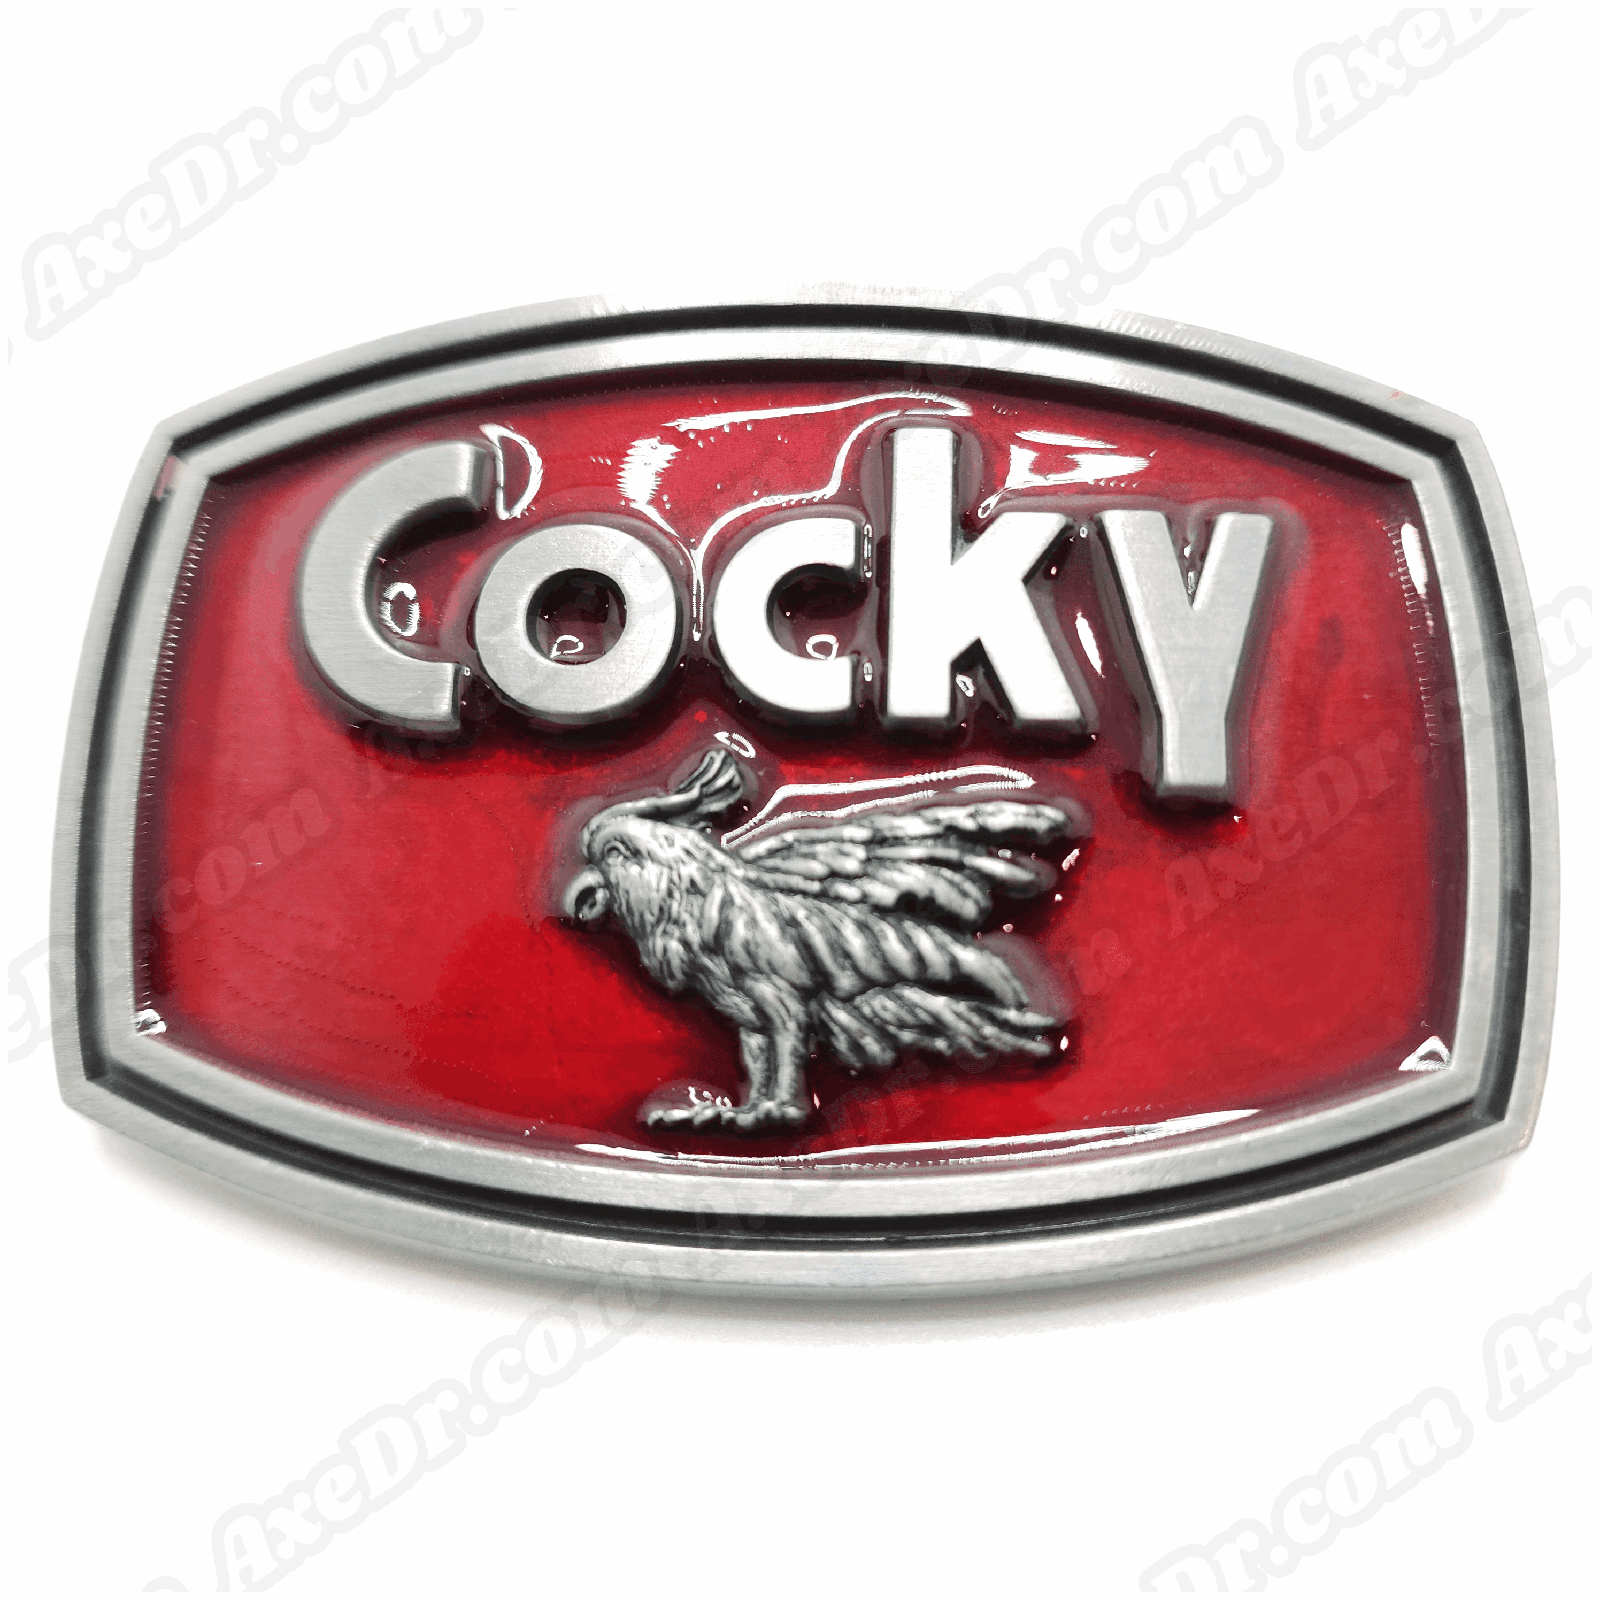 Funny Cocky Rooster Belt Buckle Red shop.AxeDr.com Beltbuckle, Buckle, Funny Belt Buckle, Lighters